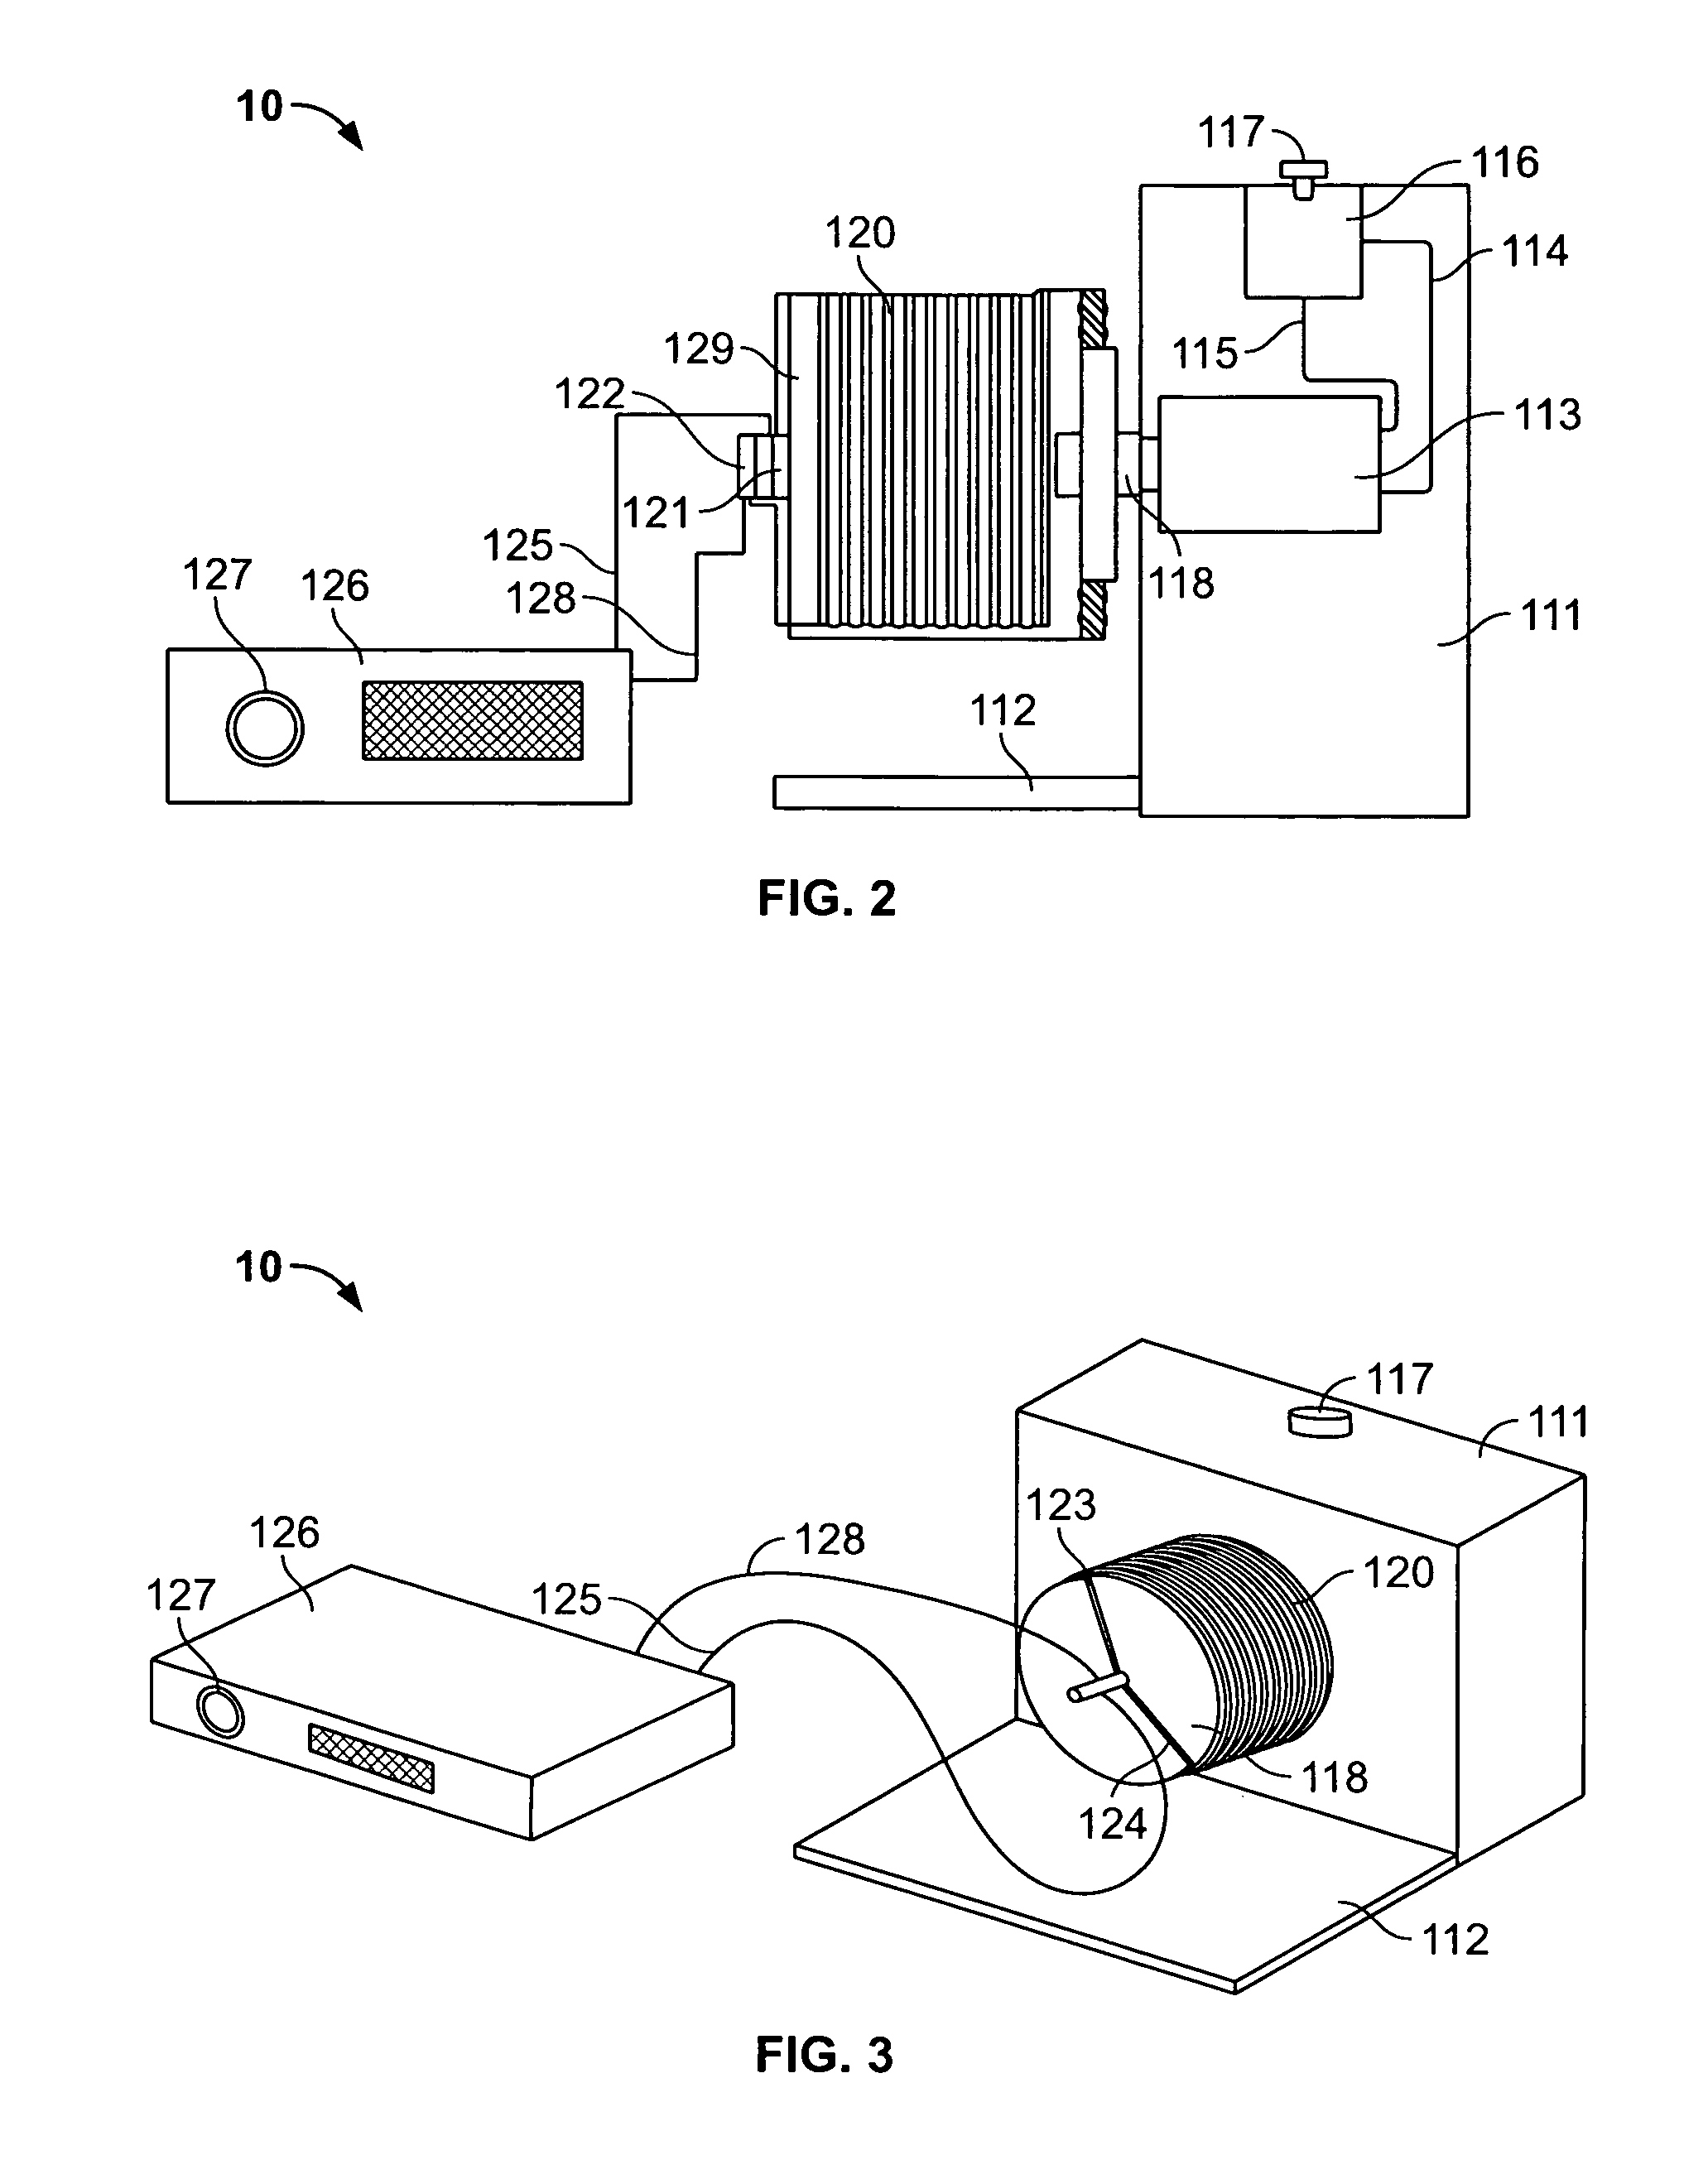 Method and composition for repairing epithelial and other cells and tissue